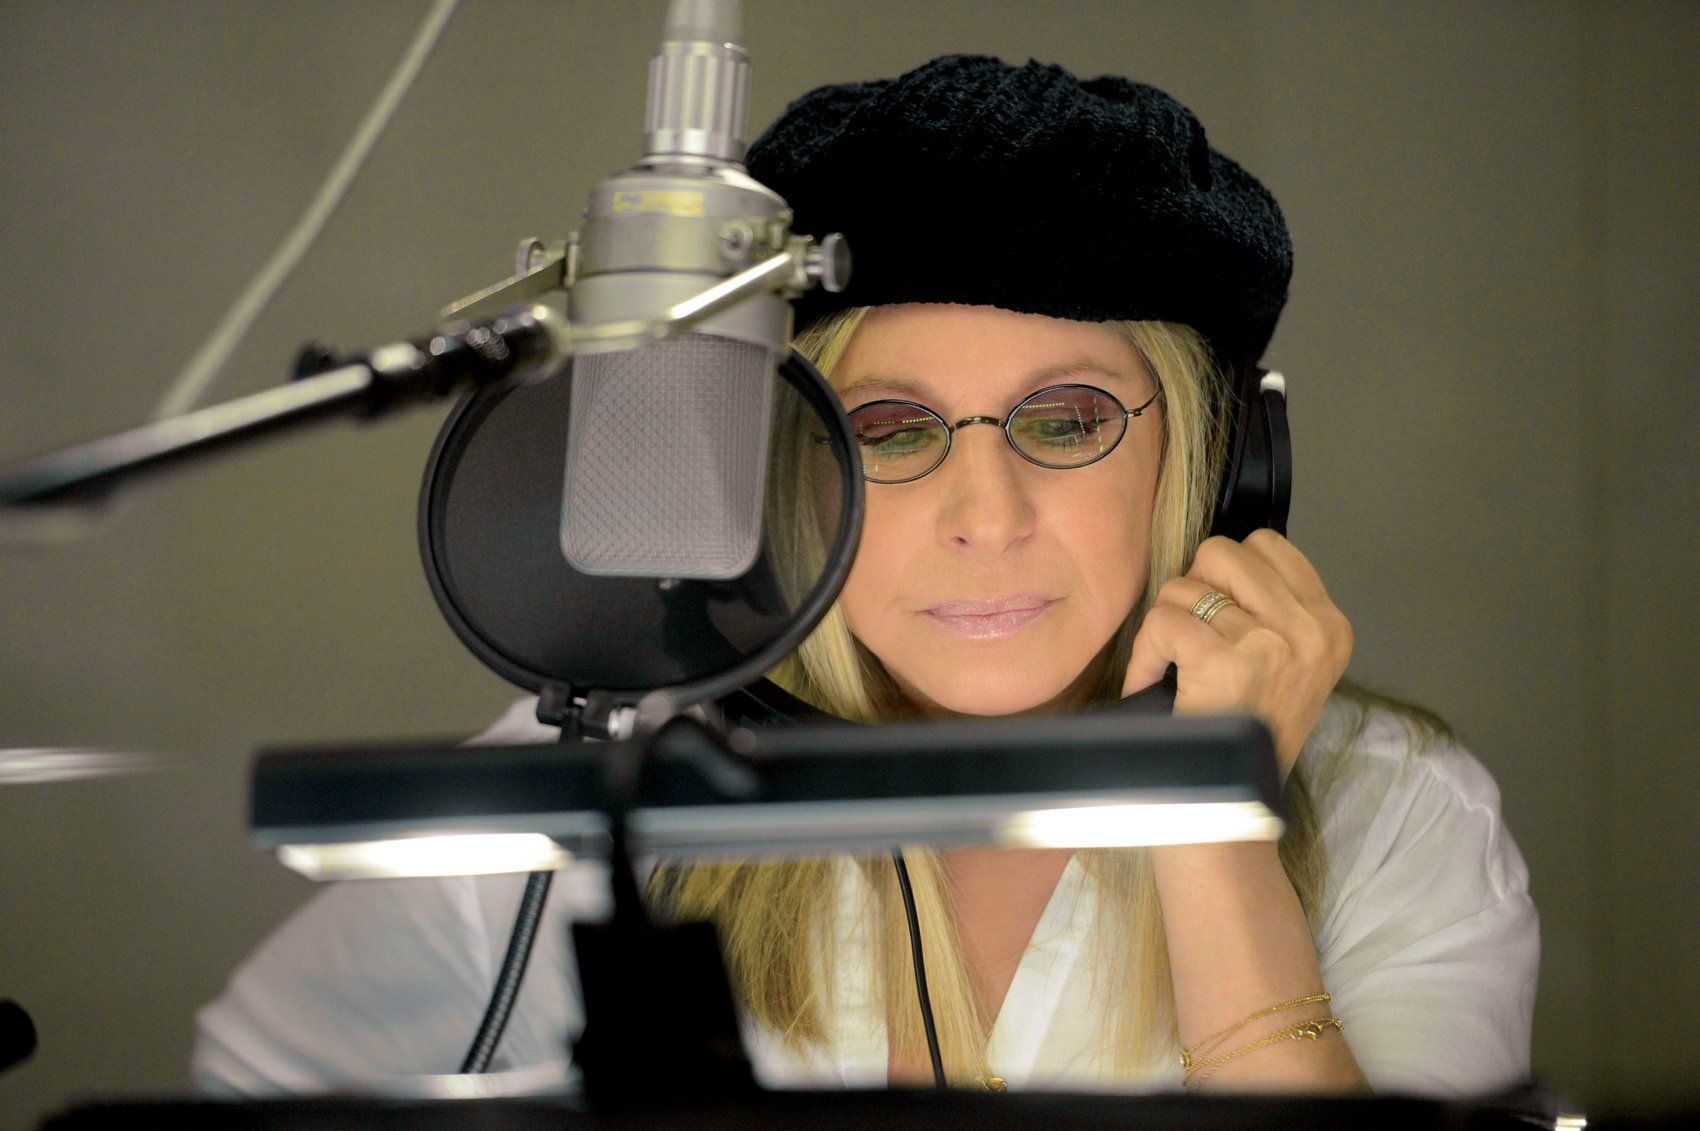 Streisand at the microphone, recording the Partners album.